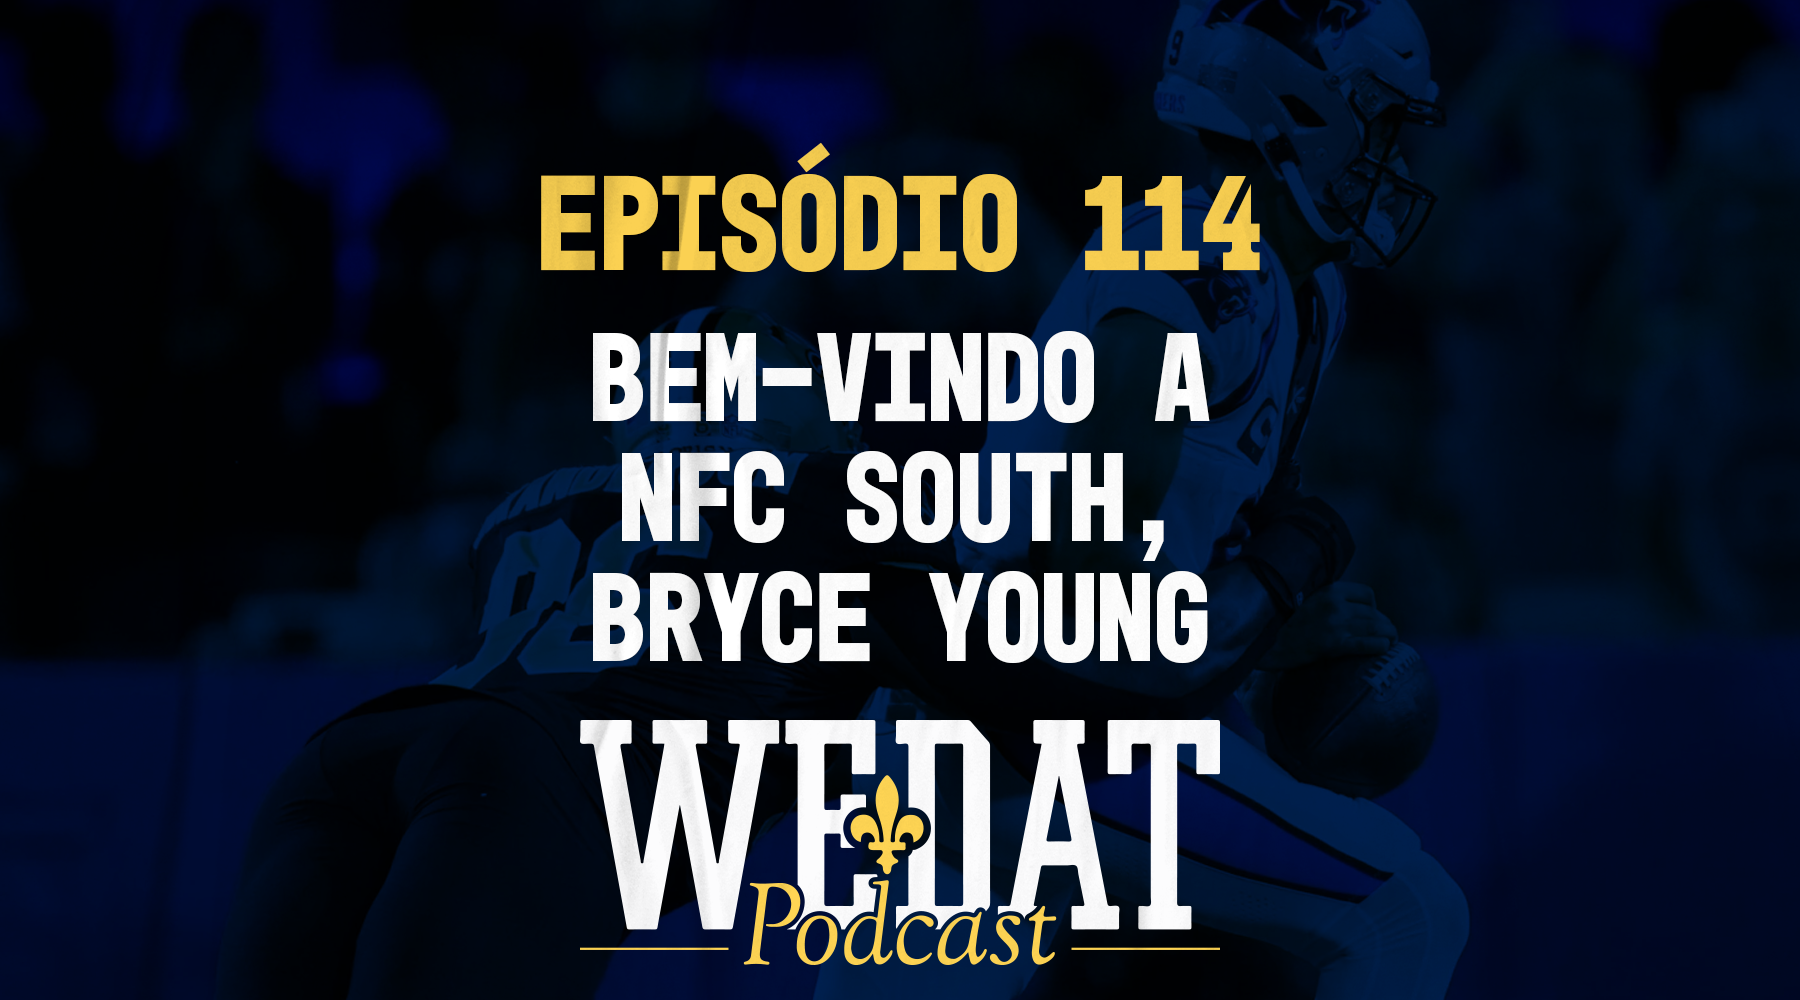 We Dat Podcast #114 – Bem-Vindo a NFC South, Bryce Young